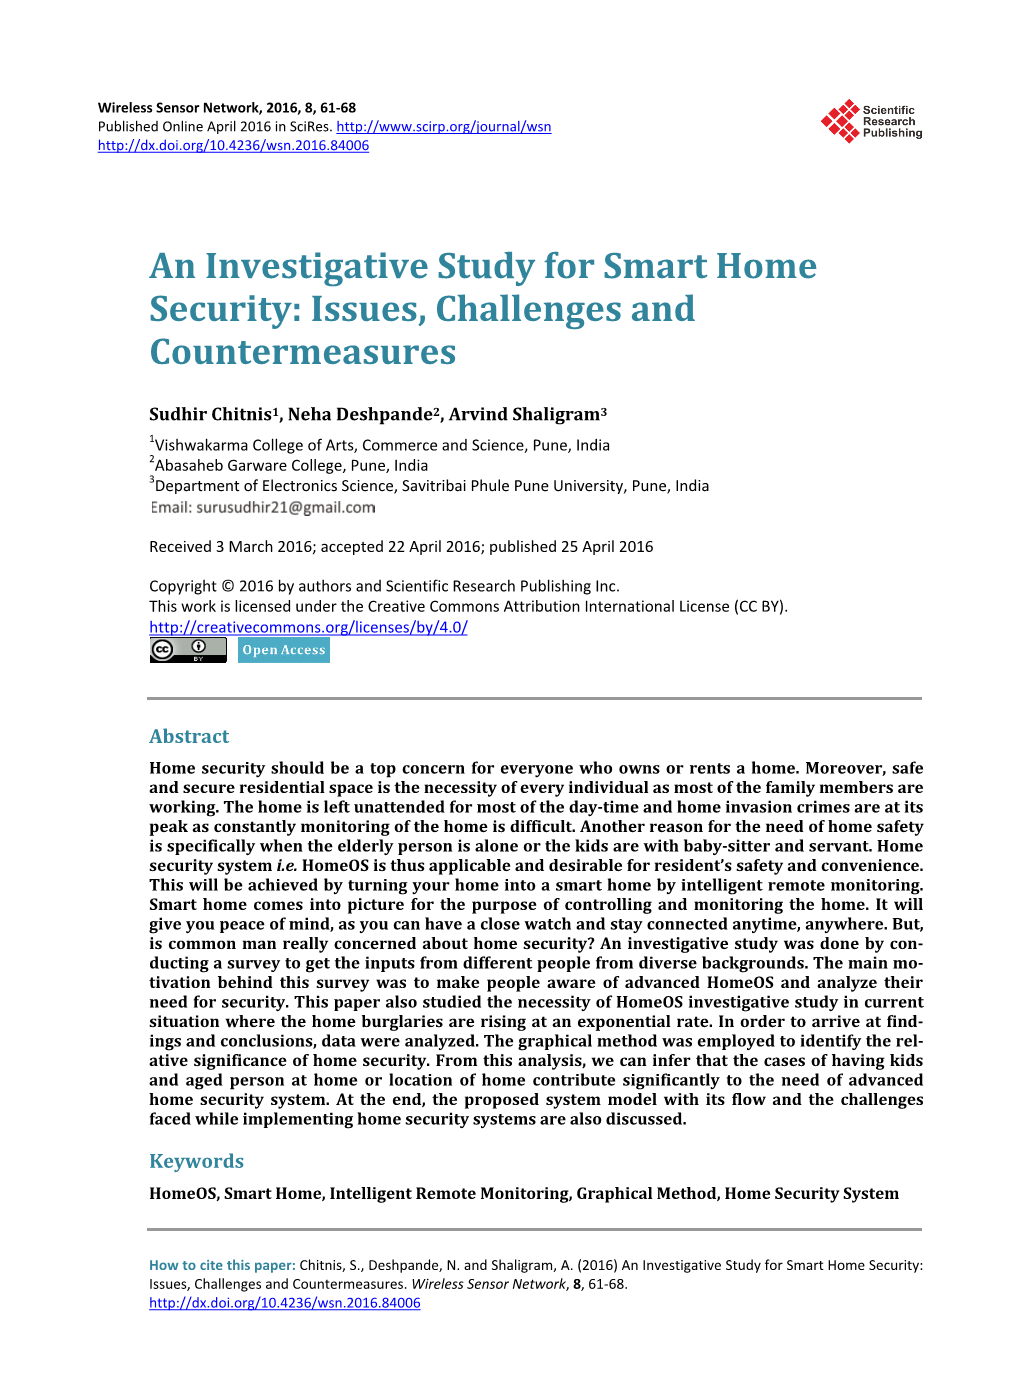 An Investigative Study for Smart Home Security: Issues, Challenges and Countermeasures